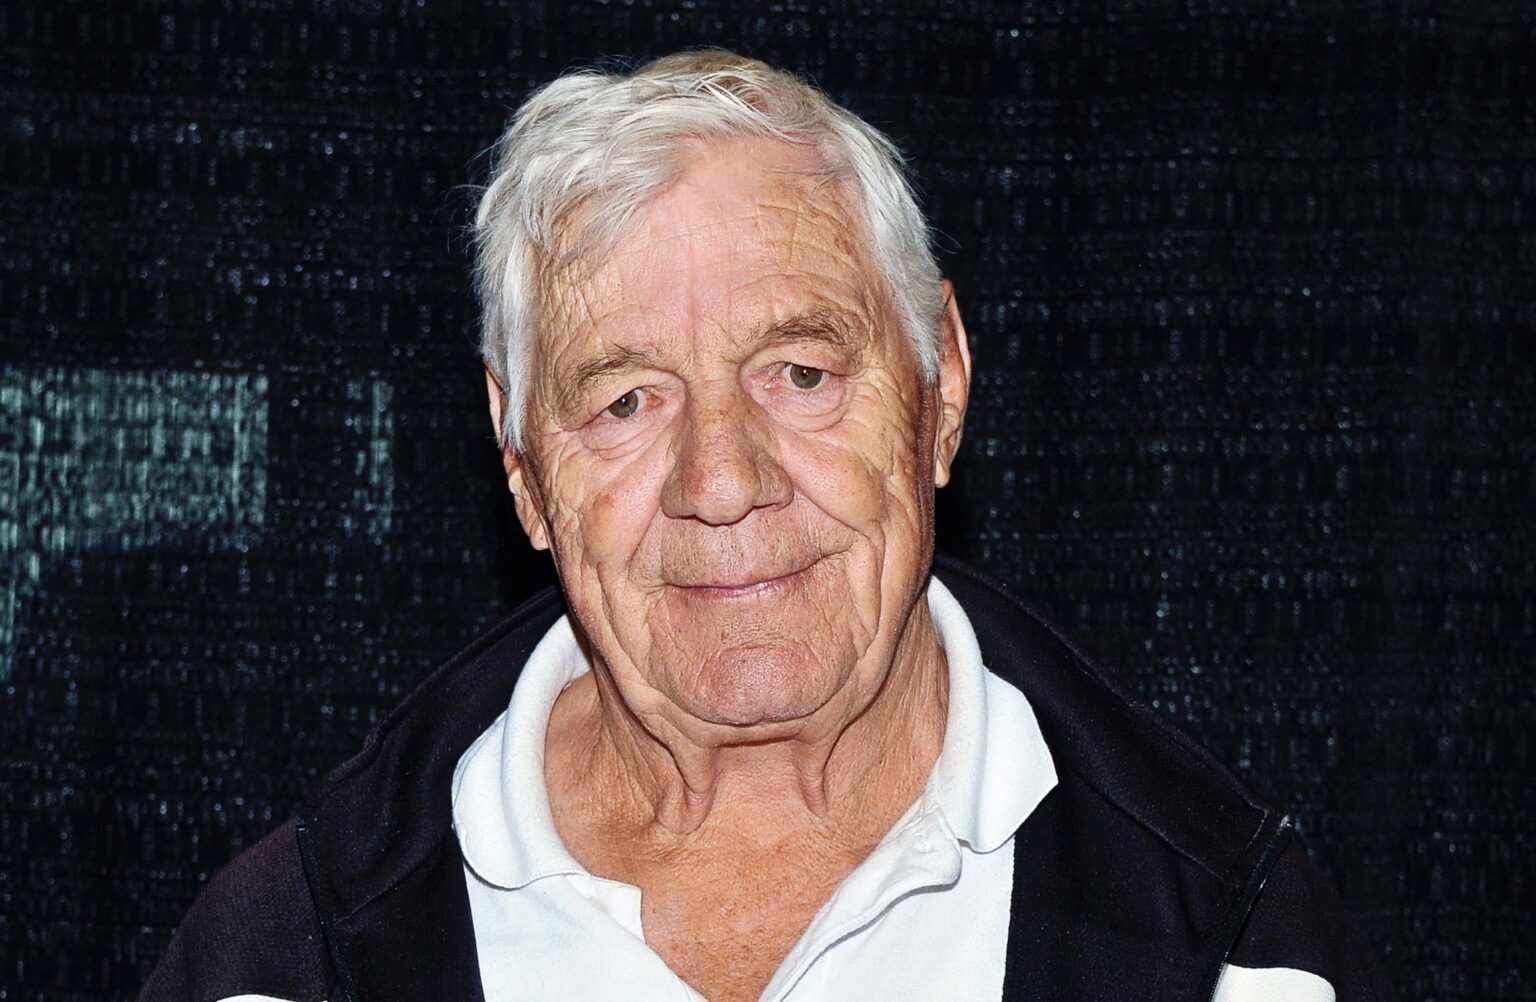 WWE superstar Pat Patterson has died at the age of 79. A legend in the sport, he leaves an indelible wrestling legacy.